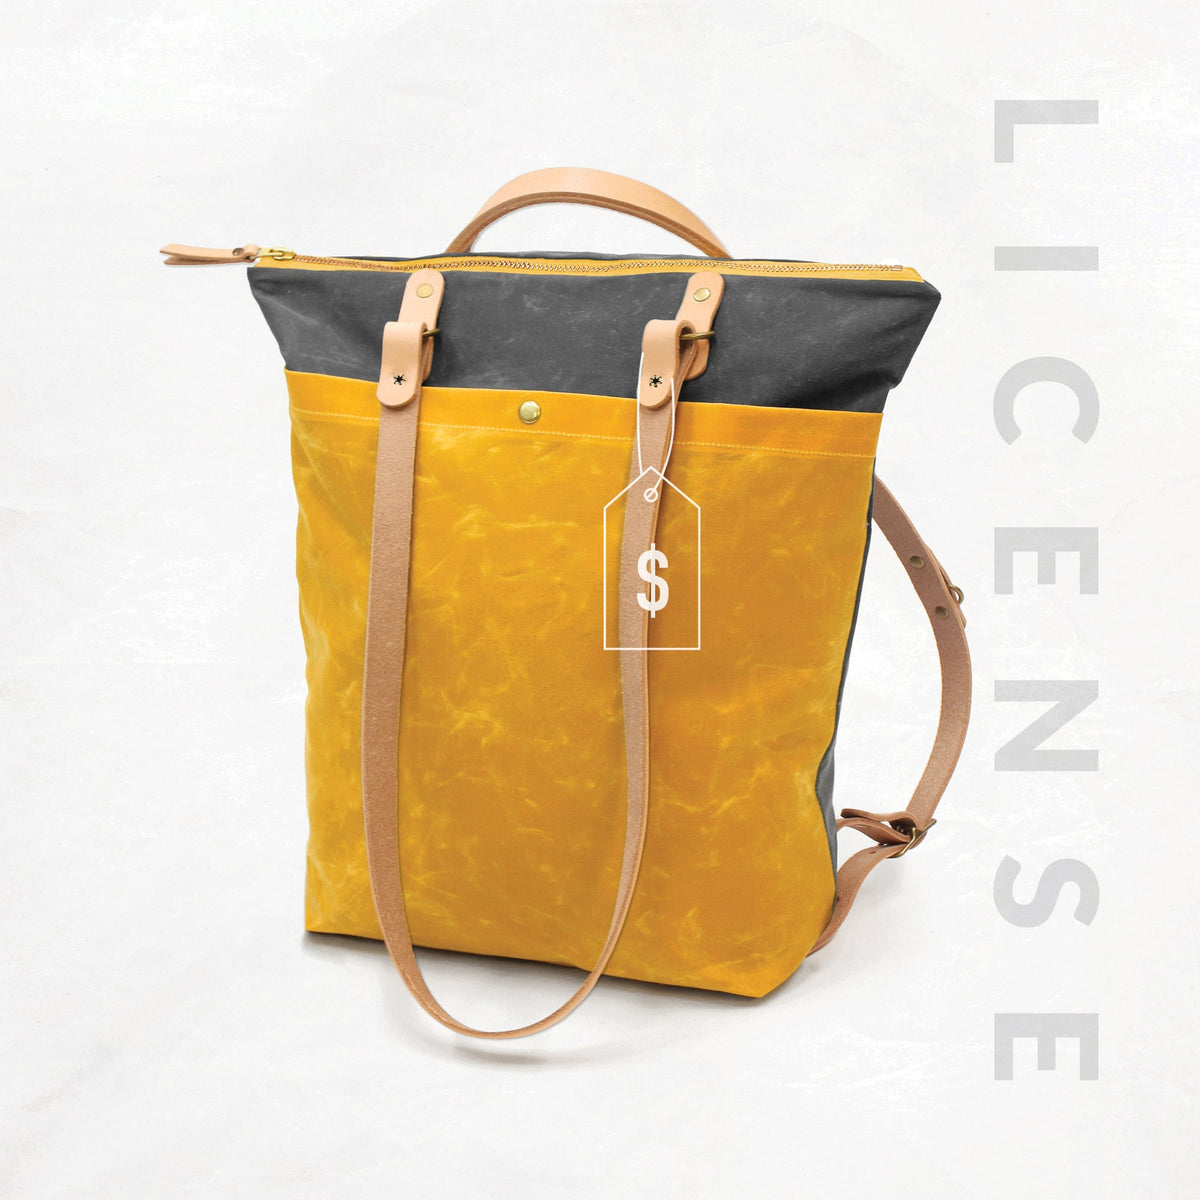 Maywood Totepack - License to Sell